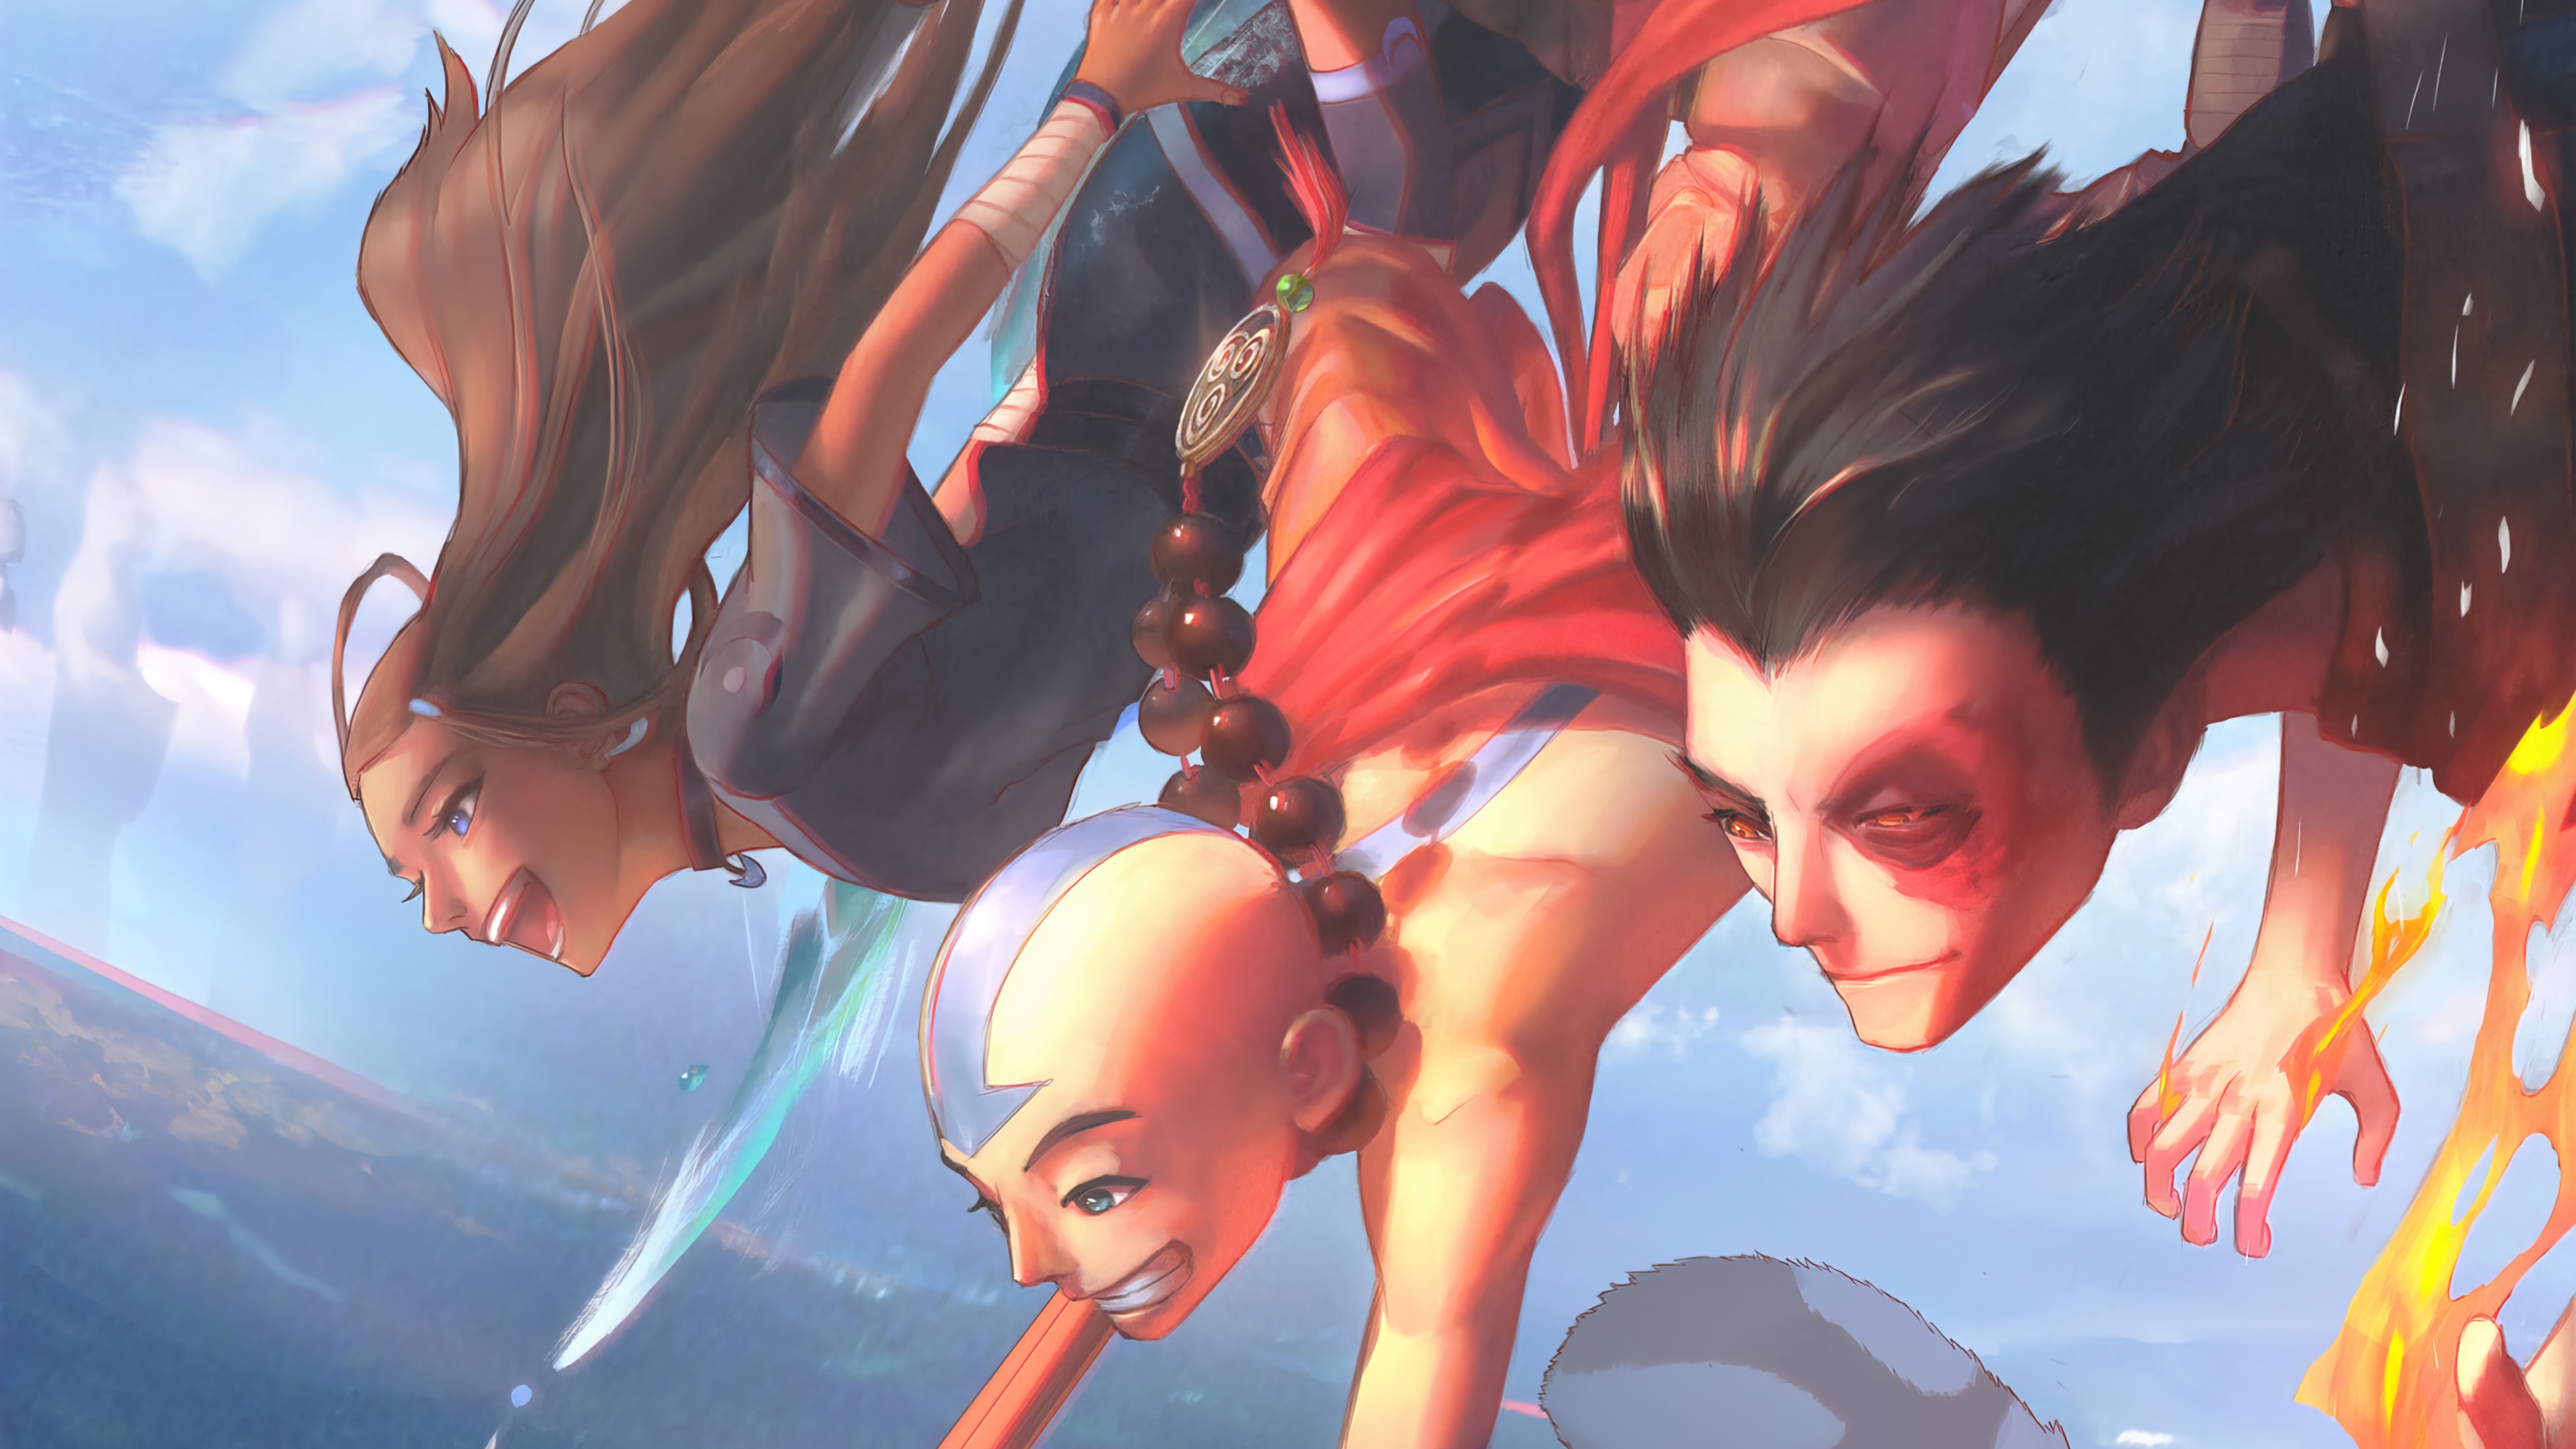 Anime Avatar: The Last Airbender 4k Ultra HD Wallpaper by Paul Nong